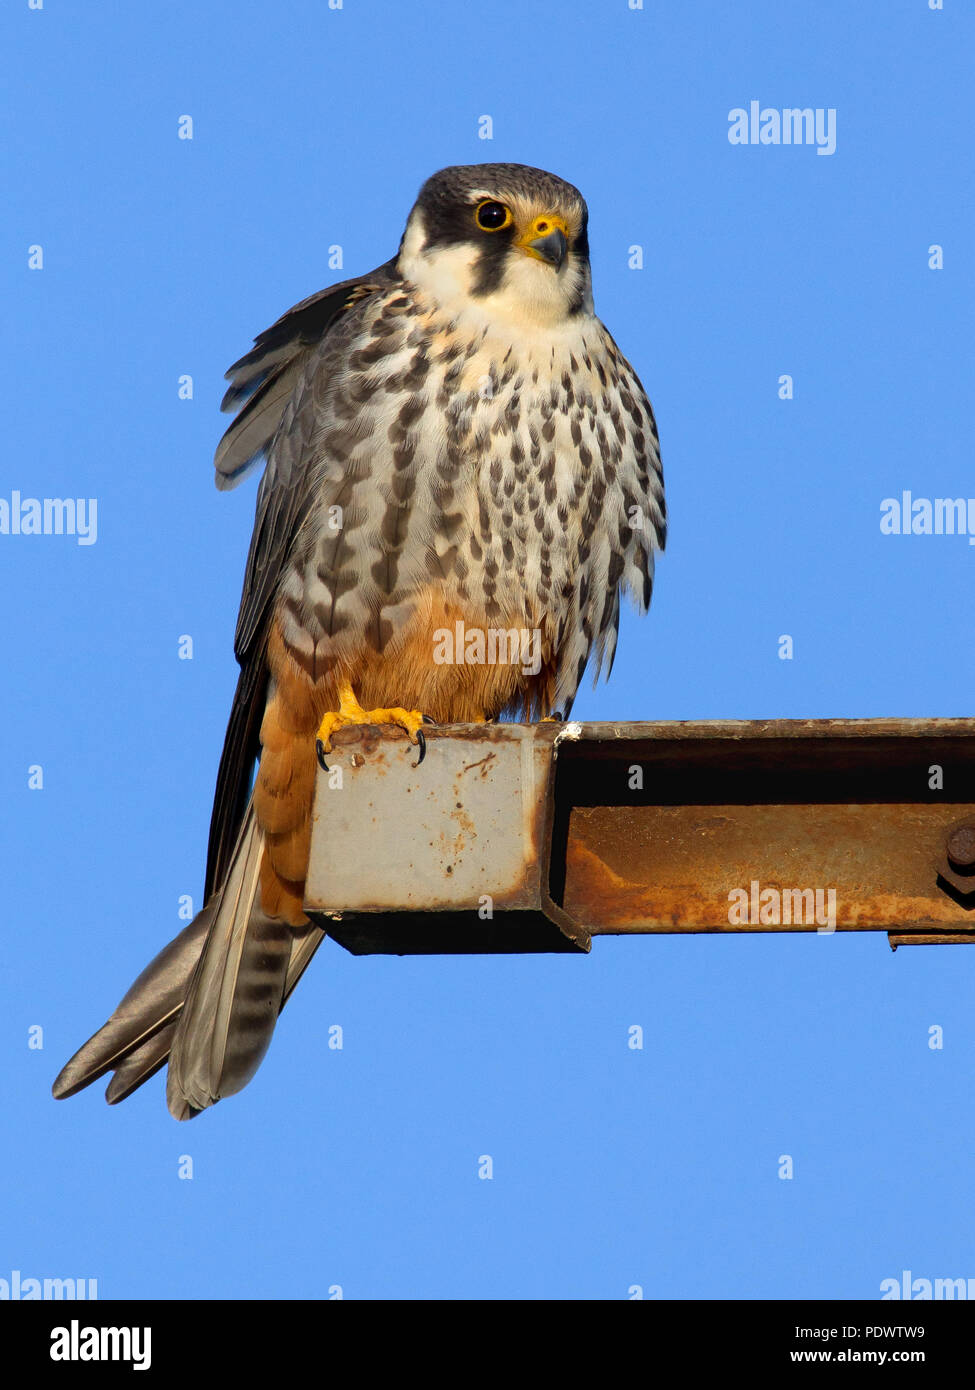 Adult Hobby in high tension pilon against a blue sky. Stock Photo